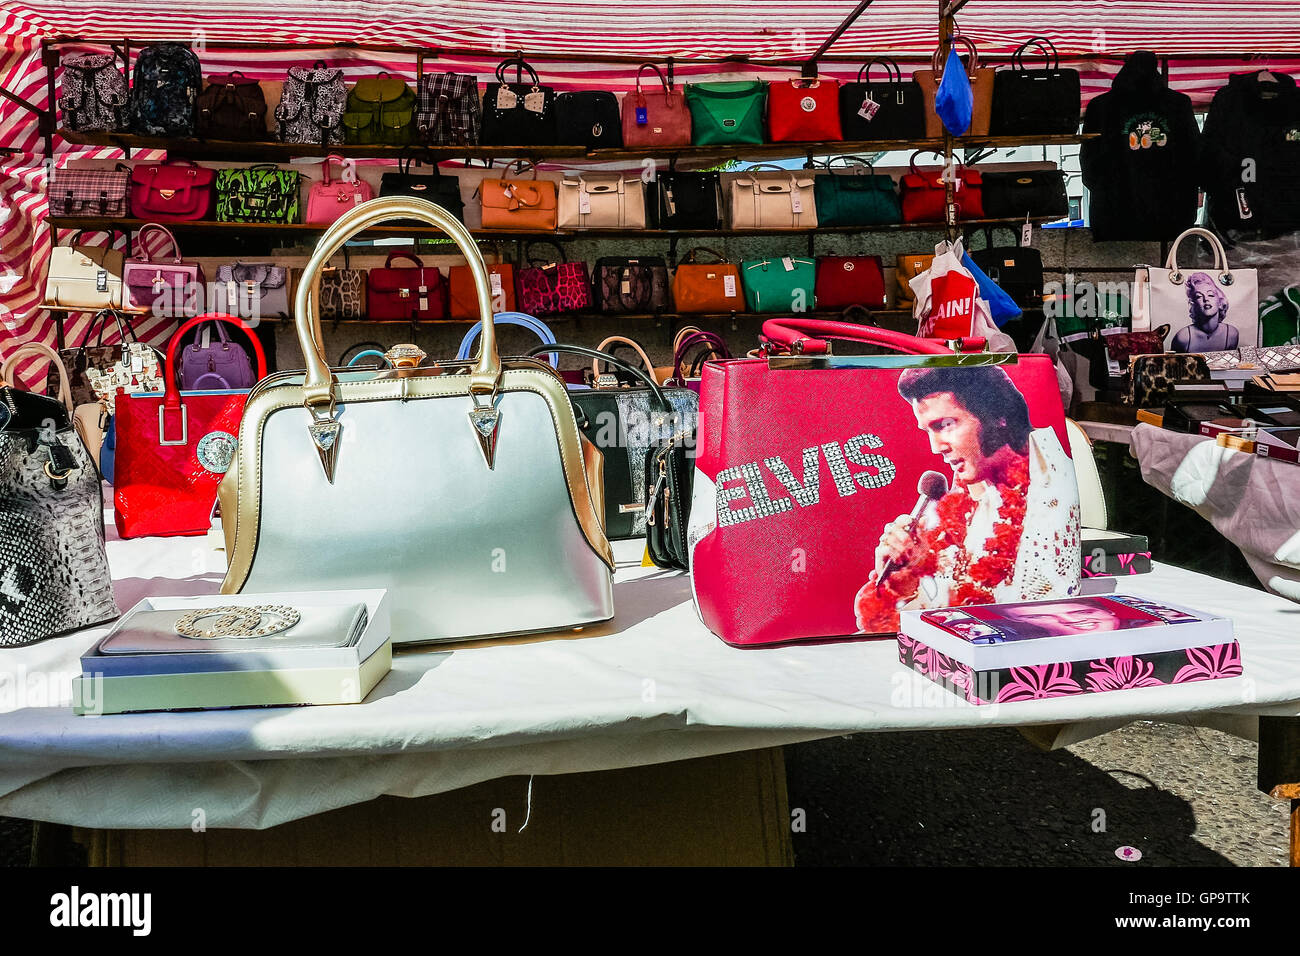 AVSALLAR, TURKEY - JUNE 20, 2014: Showcase With Fake Handbags Of Famous  American Brand Michael Kors. Stock Photo, Picture and Royalty Free Image.  Image 30373607.